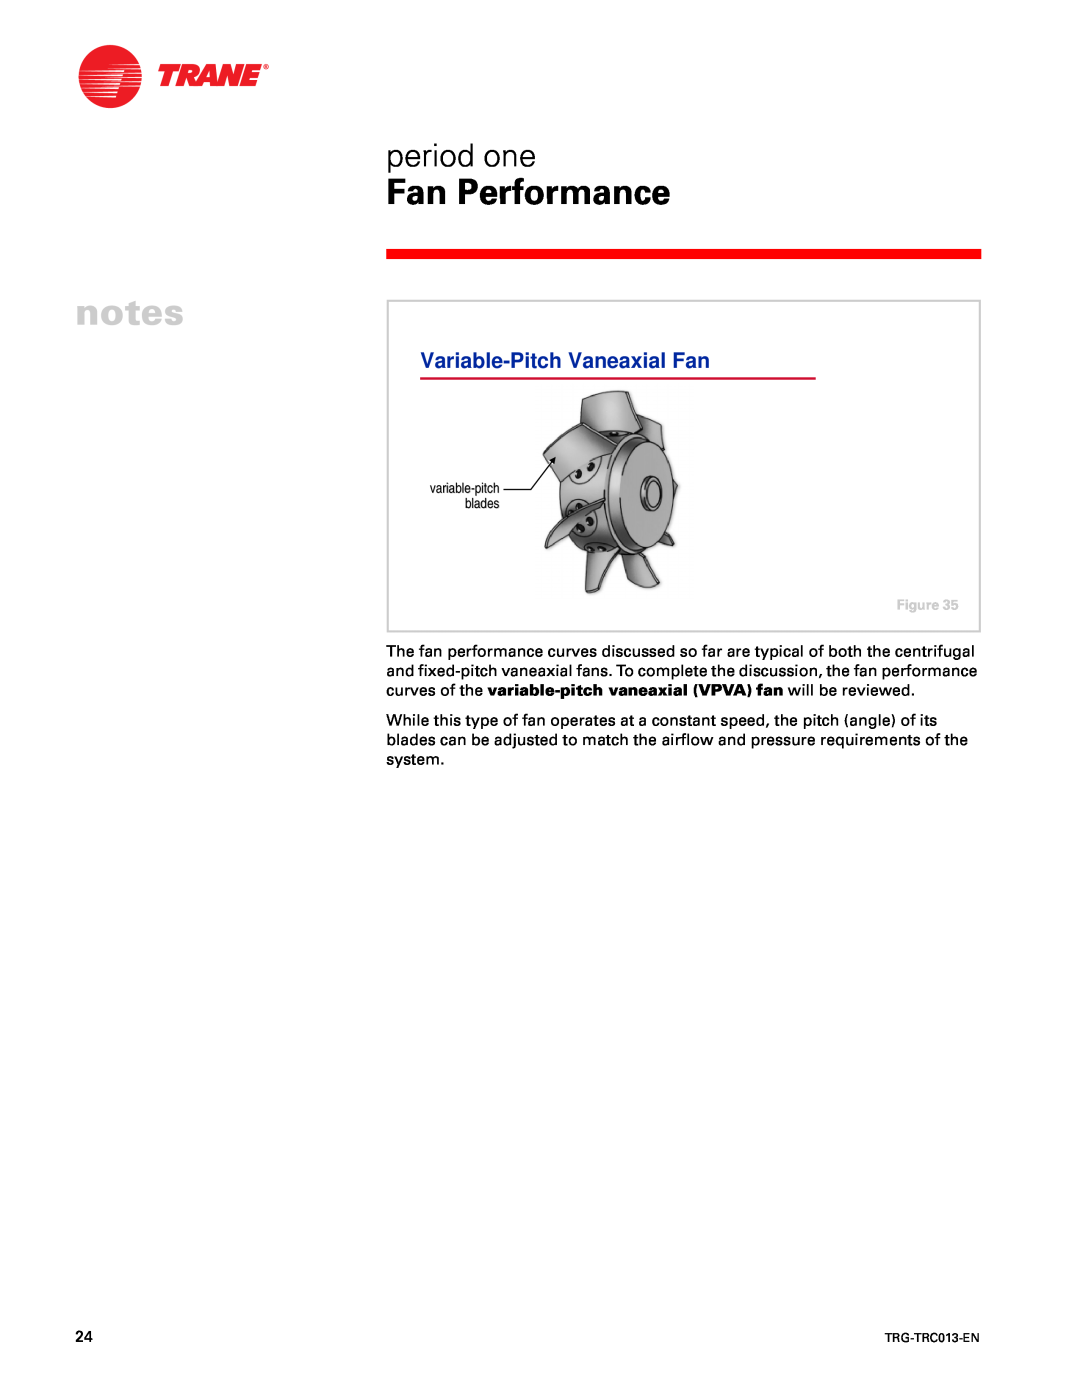 Trane TRG-TRC013-EN manual Variable-PitchVaneaxial Fan, g FH, variable-pitch blades 